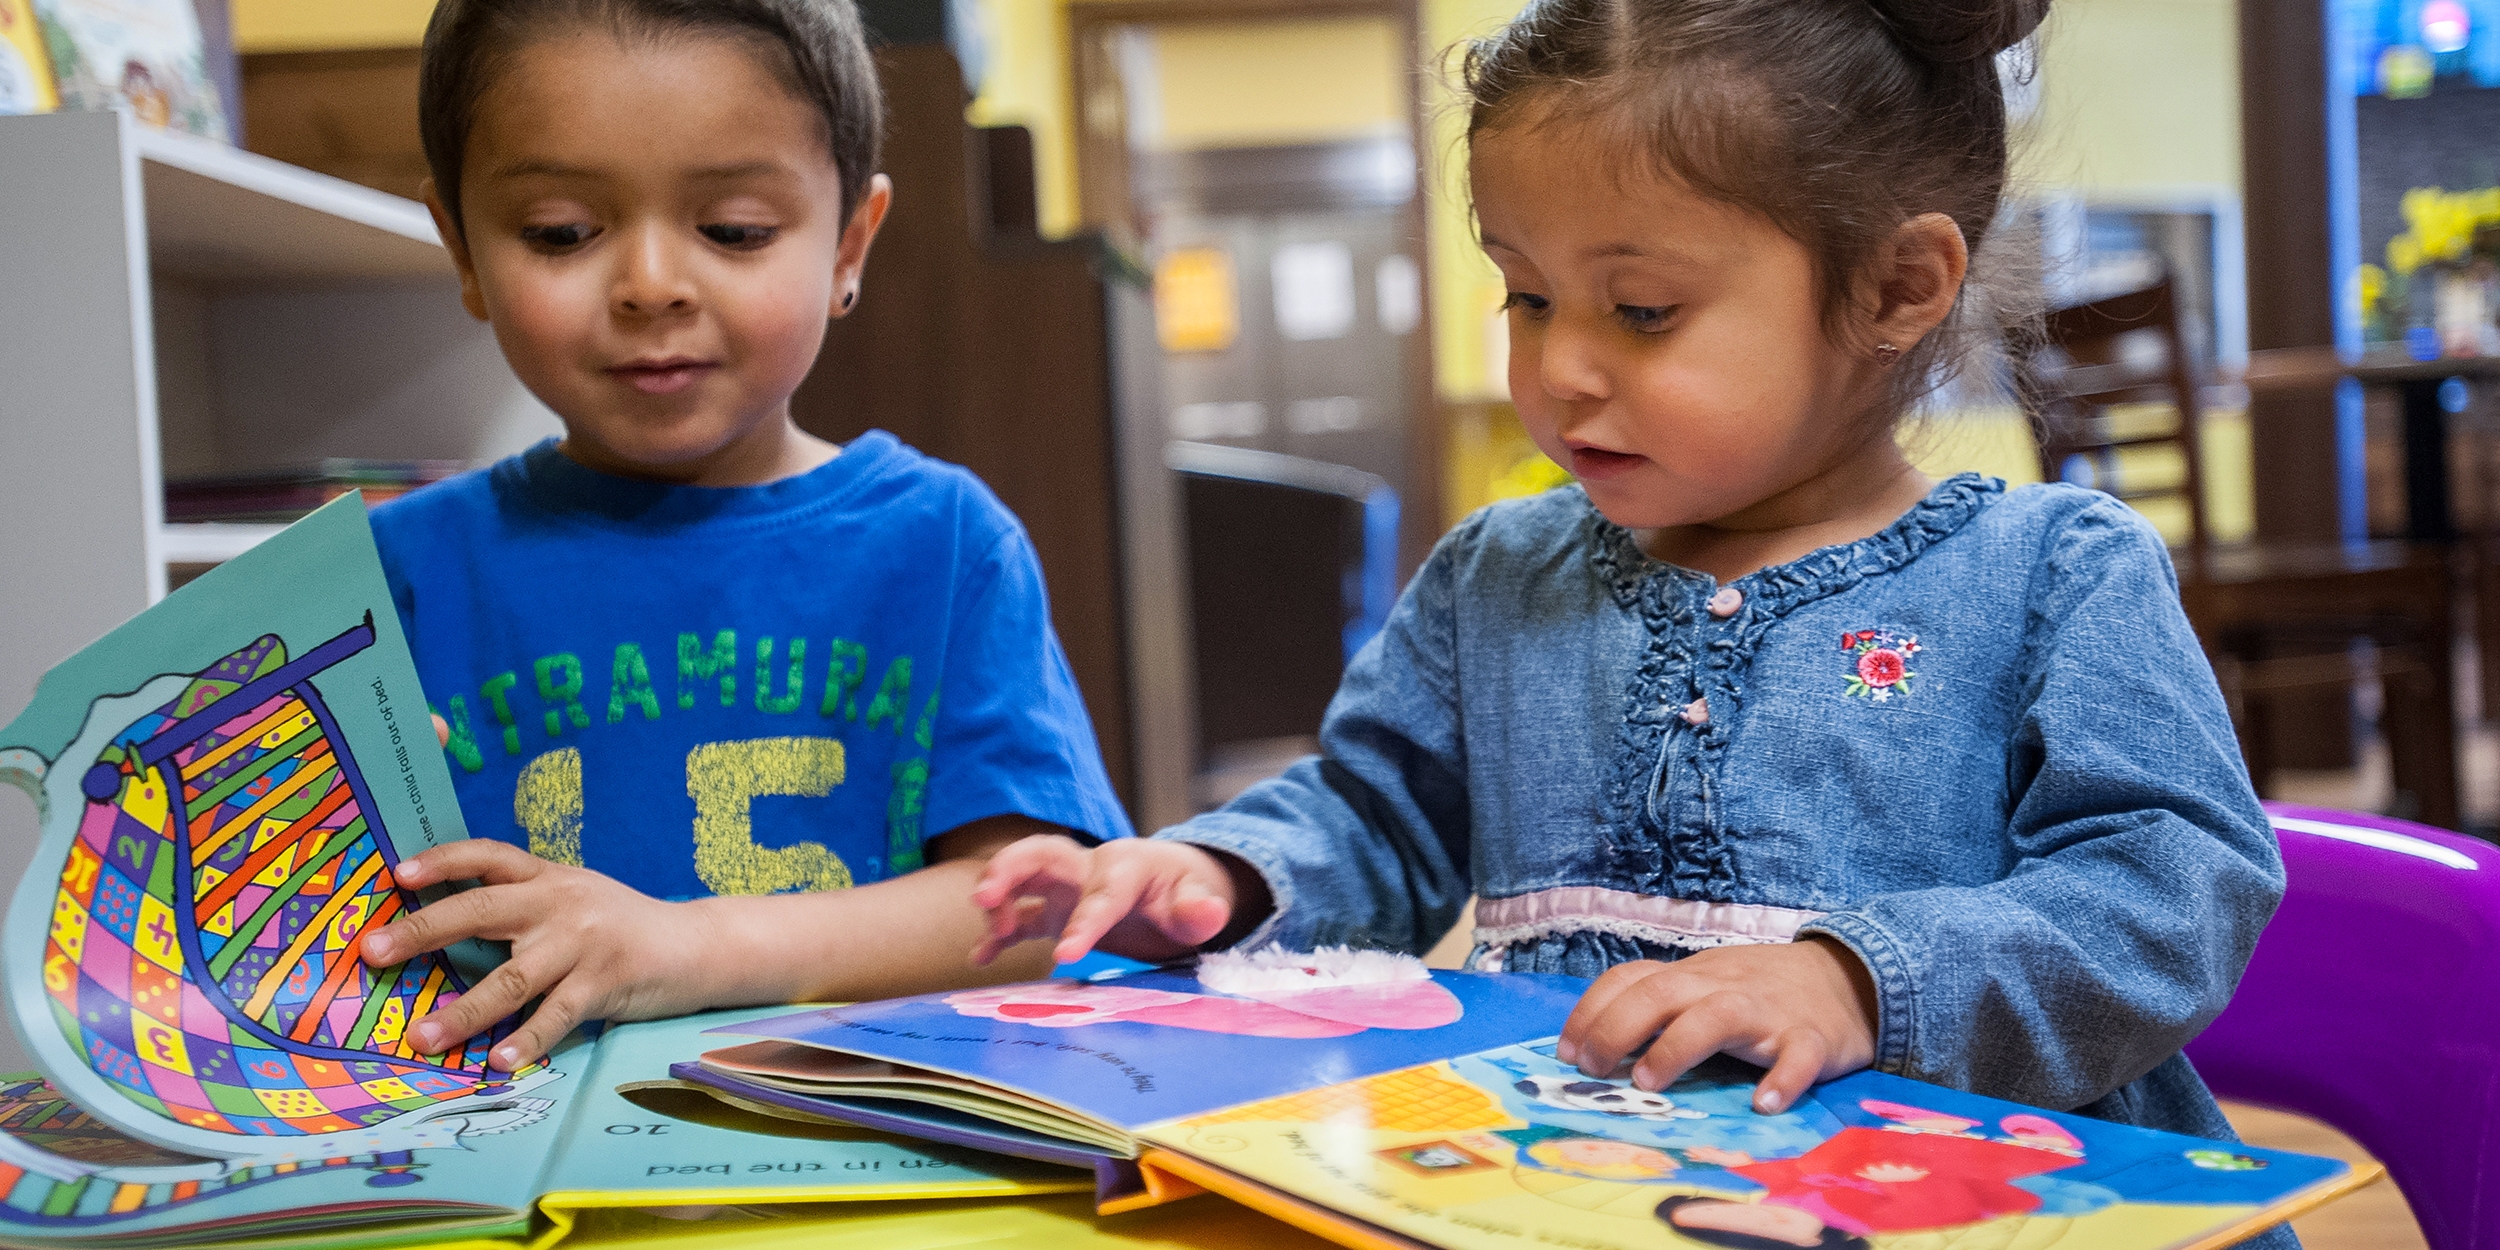 Two young children sit at a table together and look at colorful picture books. Save the Children’s early learning programs promote reading from a young age. Photo credit: Susan Warner / Save the Children, April 2016.